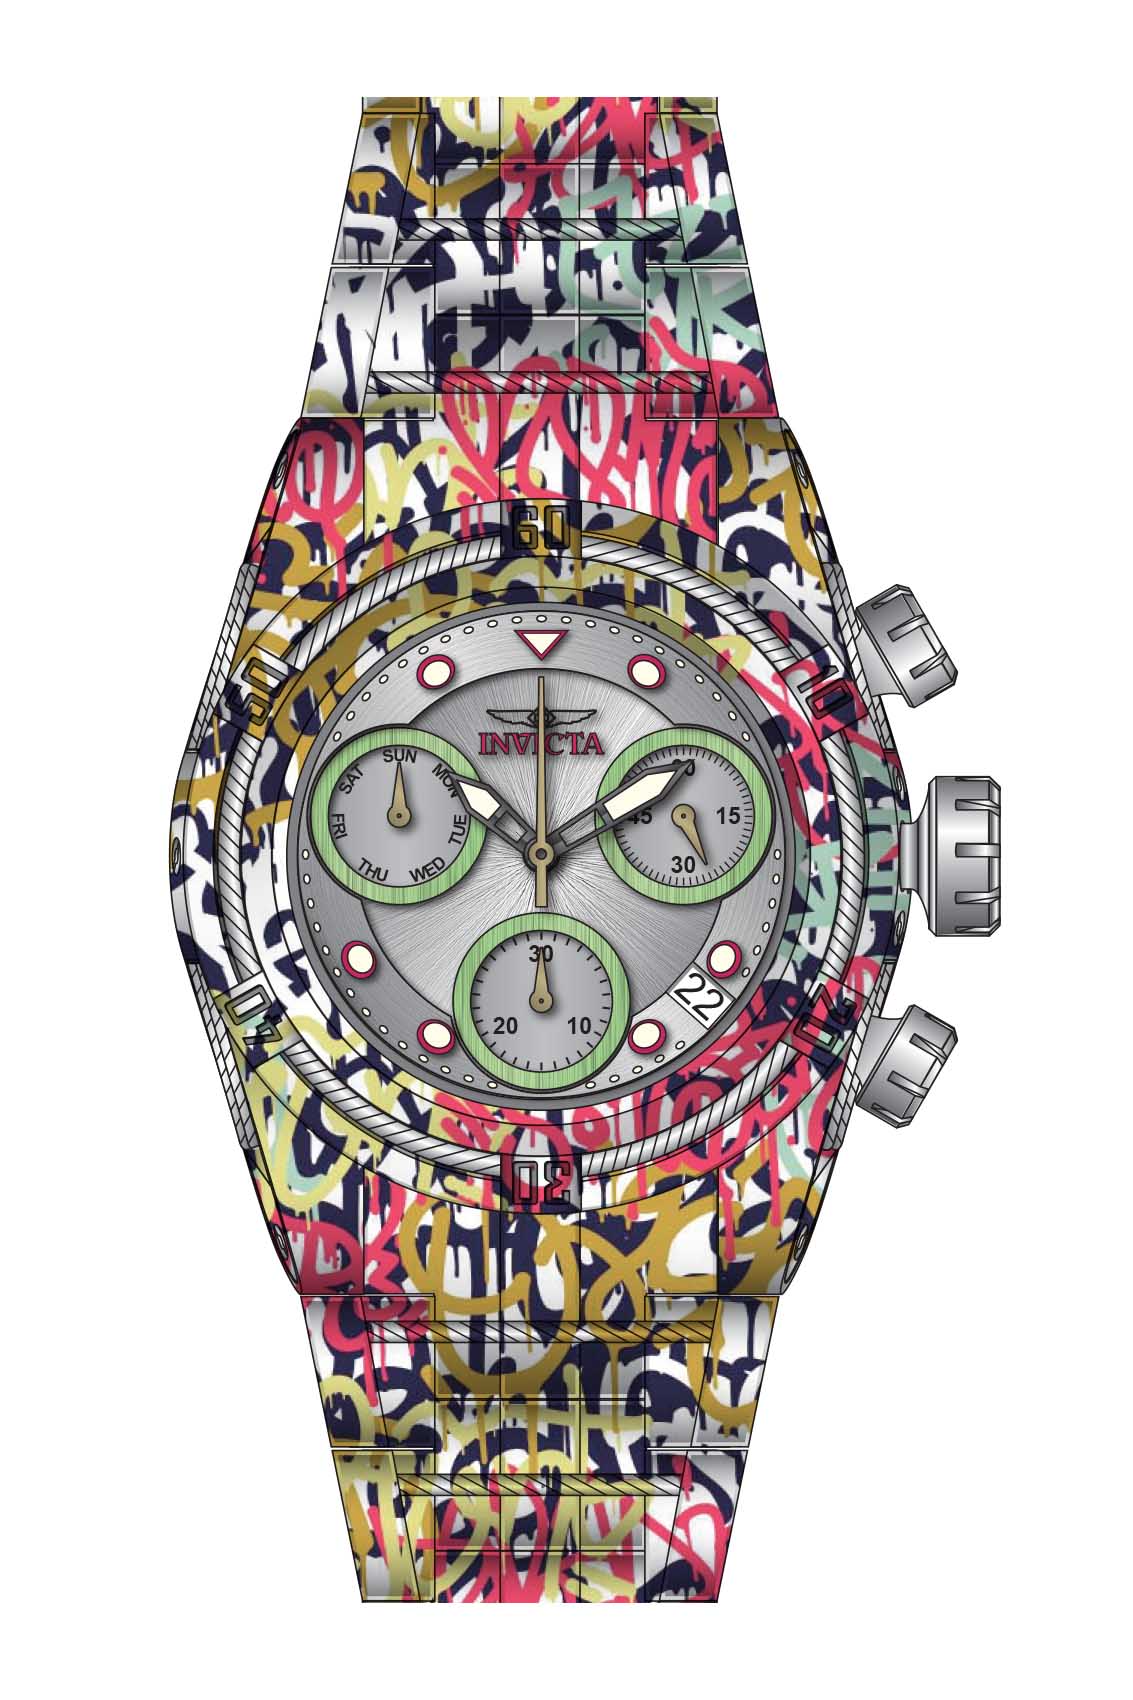 Band for Invicta Bolt Lady 34891